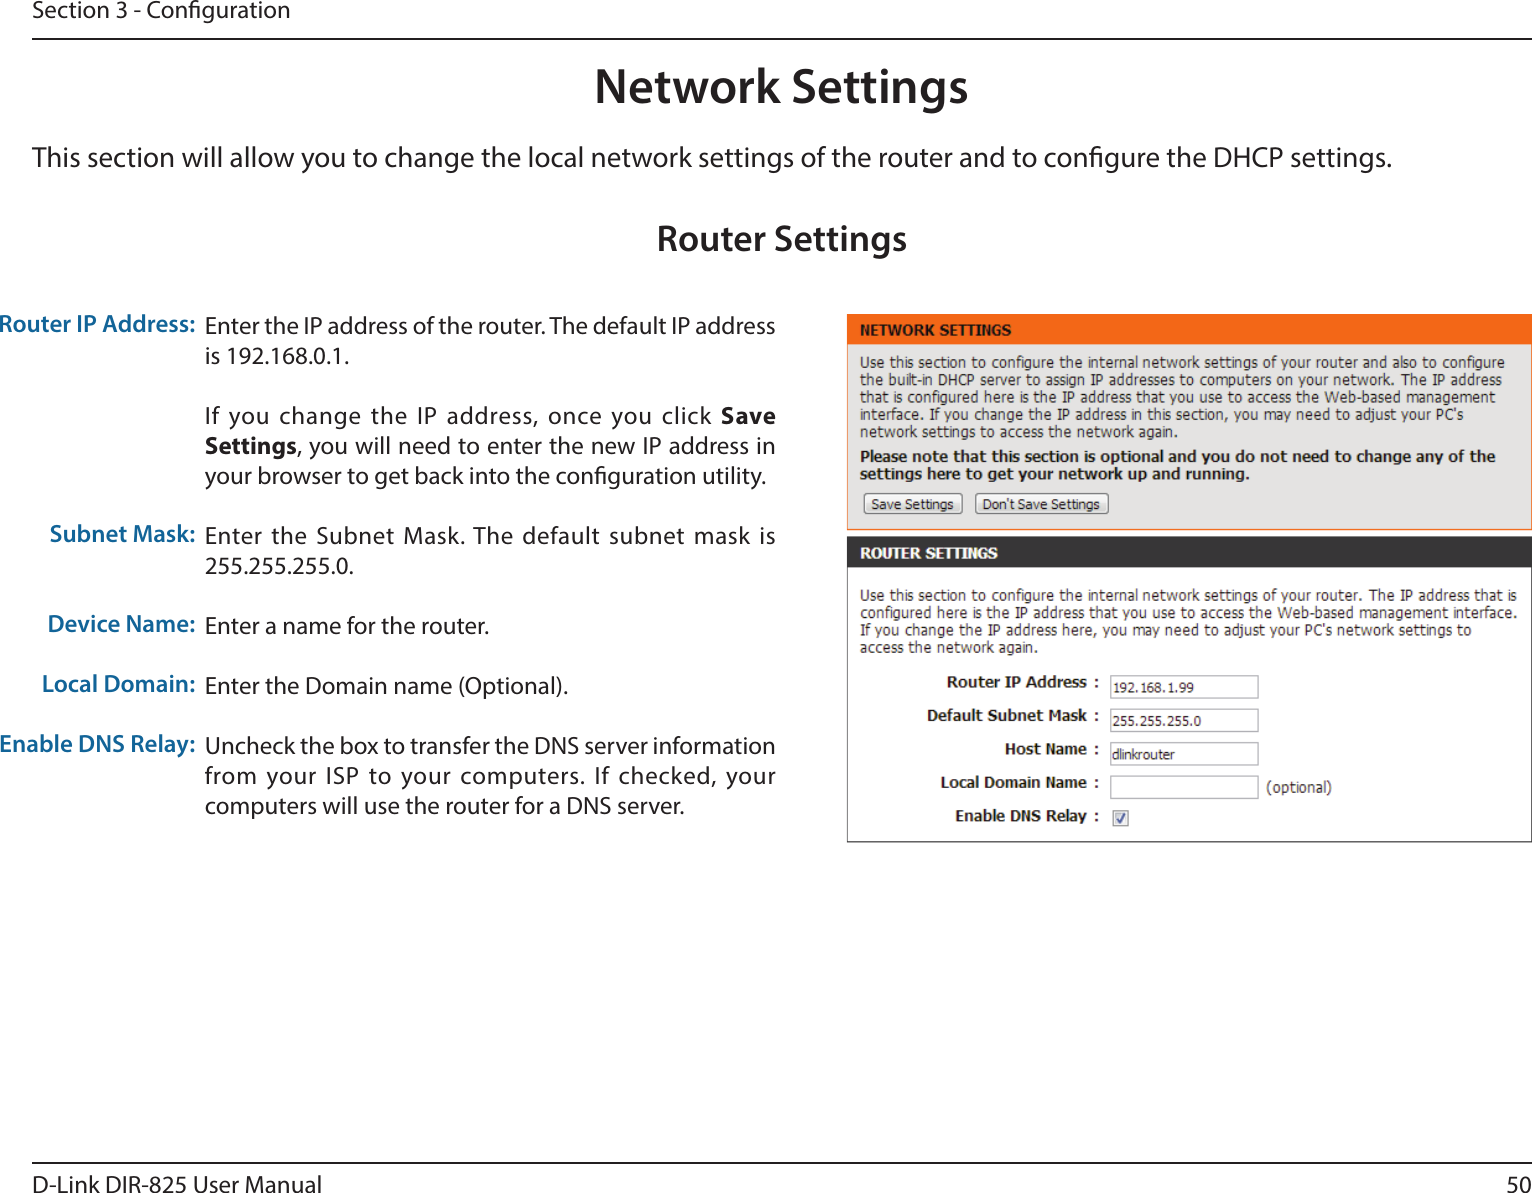 50D-Link DIR-825 User ManualSection 3 - CongurationThis section will allow you to change the local network settings of the router and to congure the DHCP settings.Network SettingsEnter the IP address of the router. The default IP address is 192.168.0.1.If you change the IP address, once you click Save Settings, you will need to enter the new IP address in your browser to get back into the conguration utility.Enter the Subnet Mask. The default subnet mask is 255.255.255.0.Enter a name for the router.Enter the Domain name (Optional).Uncheck the box to transfer the DNS server information from your ISP to your computers. If checked, your computers will use the router for a DNS server.Router IP Address:Subnet Mask:Device Name:Local Domain:Enable DNS Relay:Router Settings